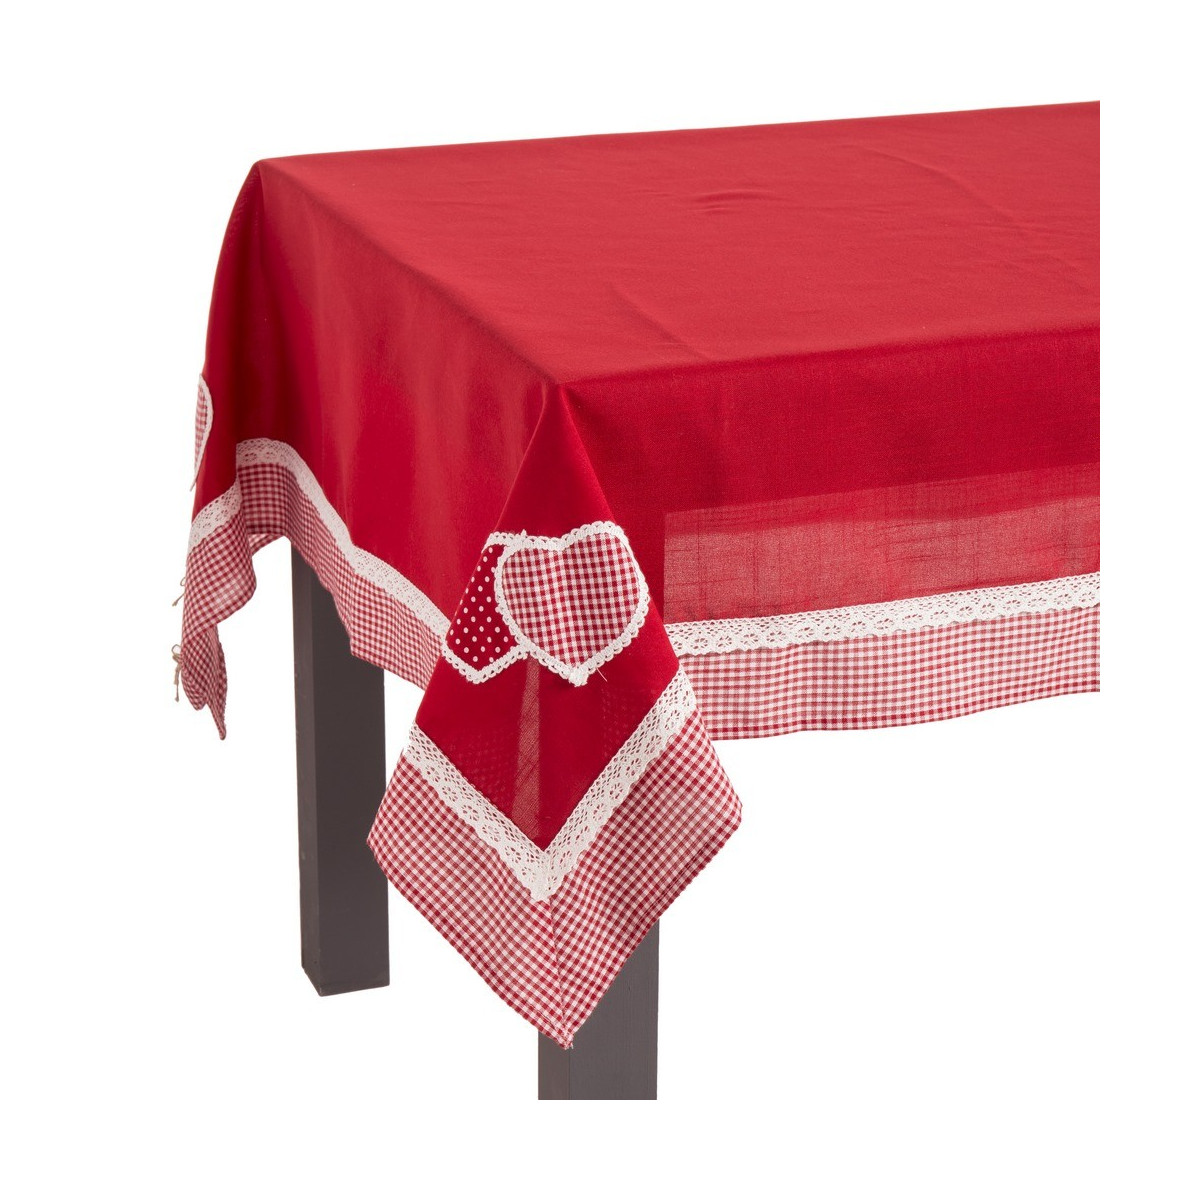 Nappe 100 % polyester rouge 150 x 150 cm